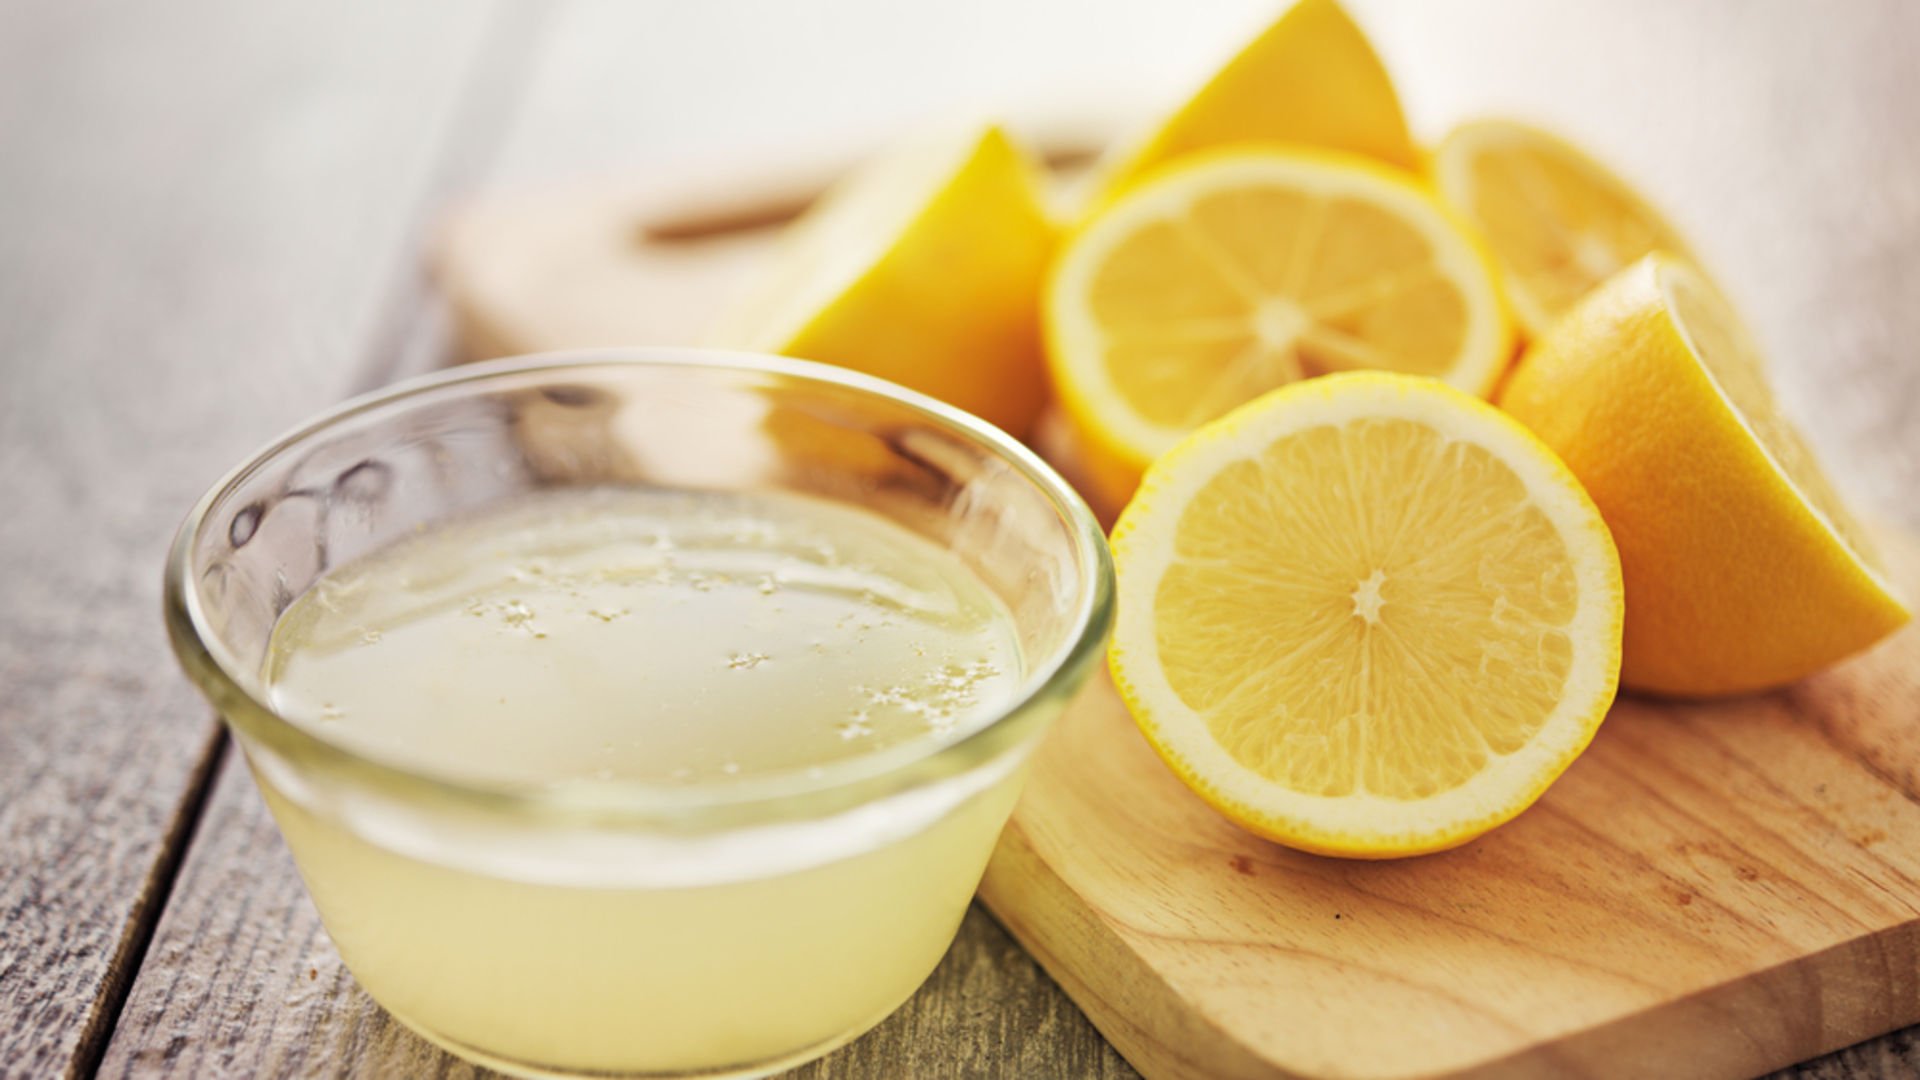 Some studies show that components such as vitamin C, citric acid and bioflavonoids contained in lemon can inhibit the growth and spread of cancer cells. Therefore, it is thought that drinking lemon juice may be beneficial in reducing the risk of cancer. 